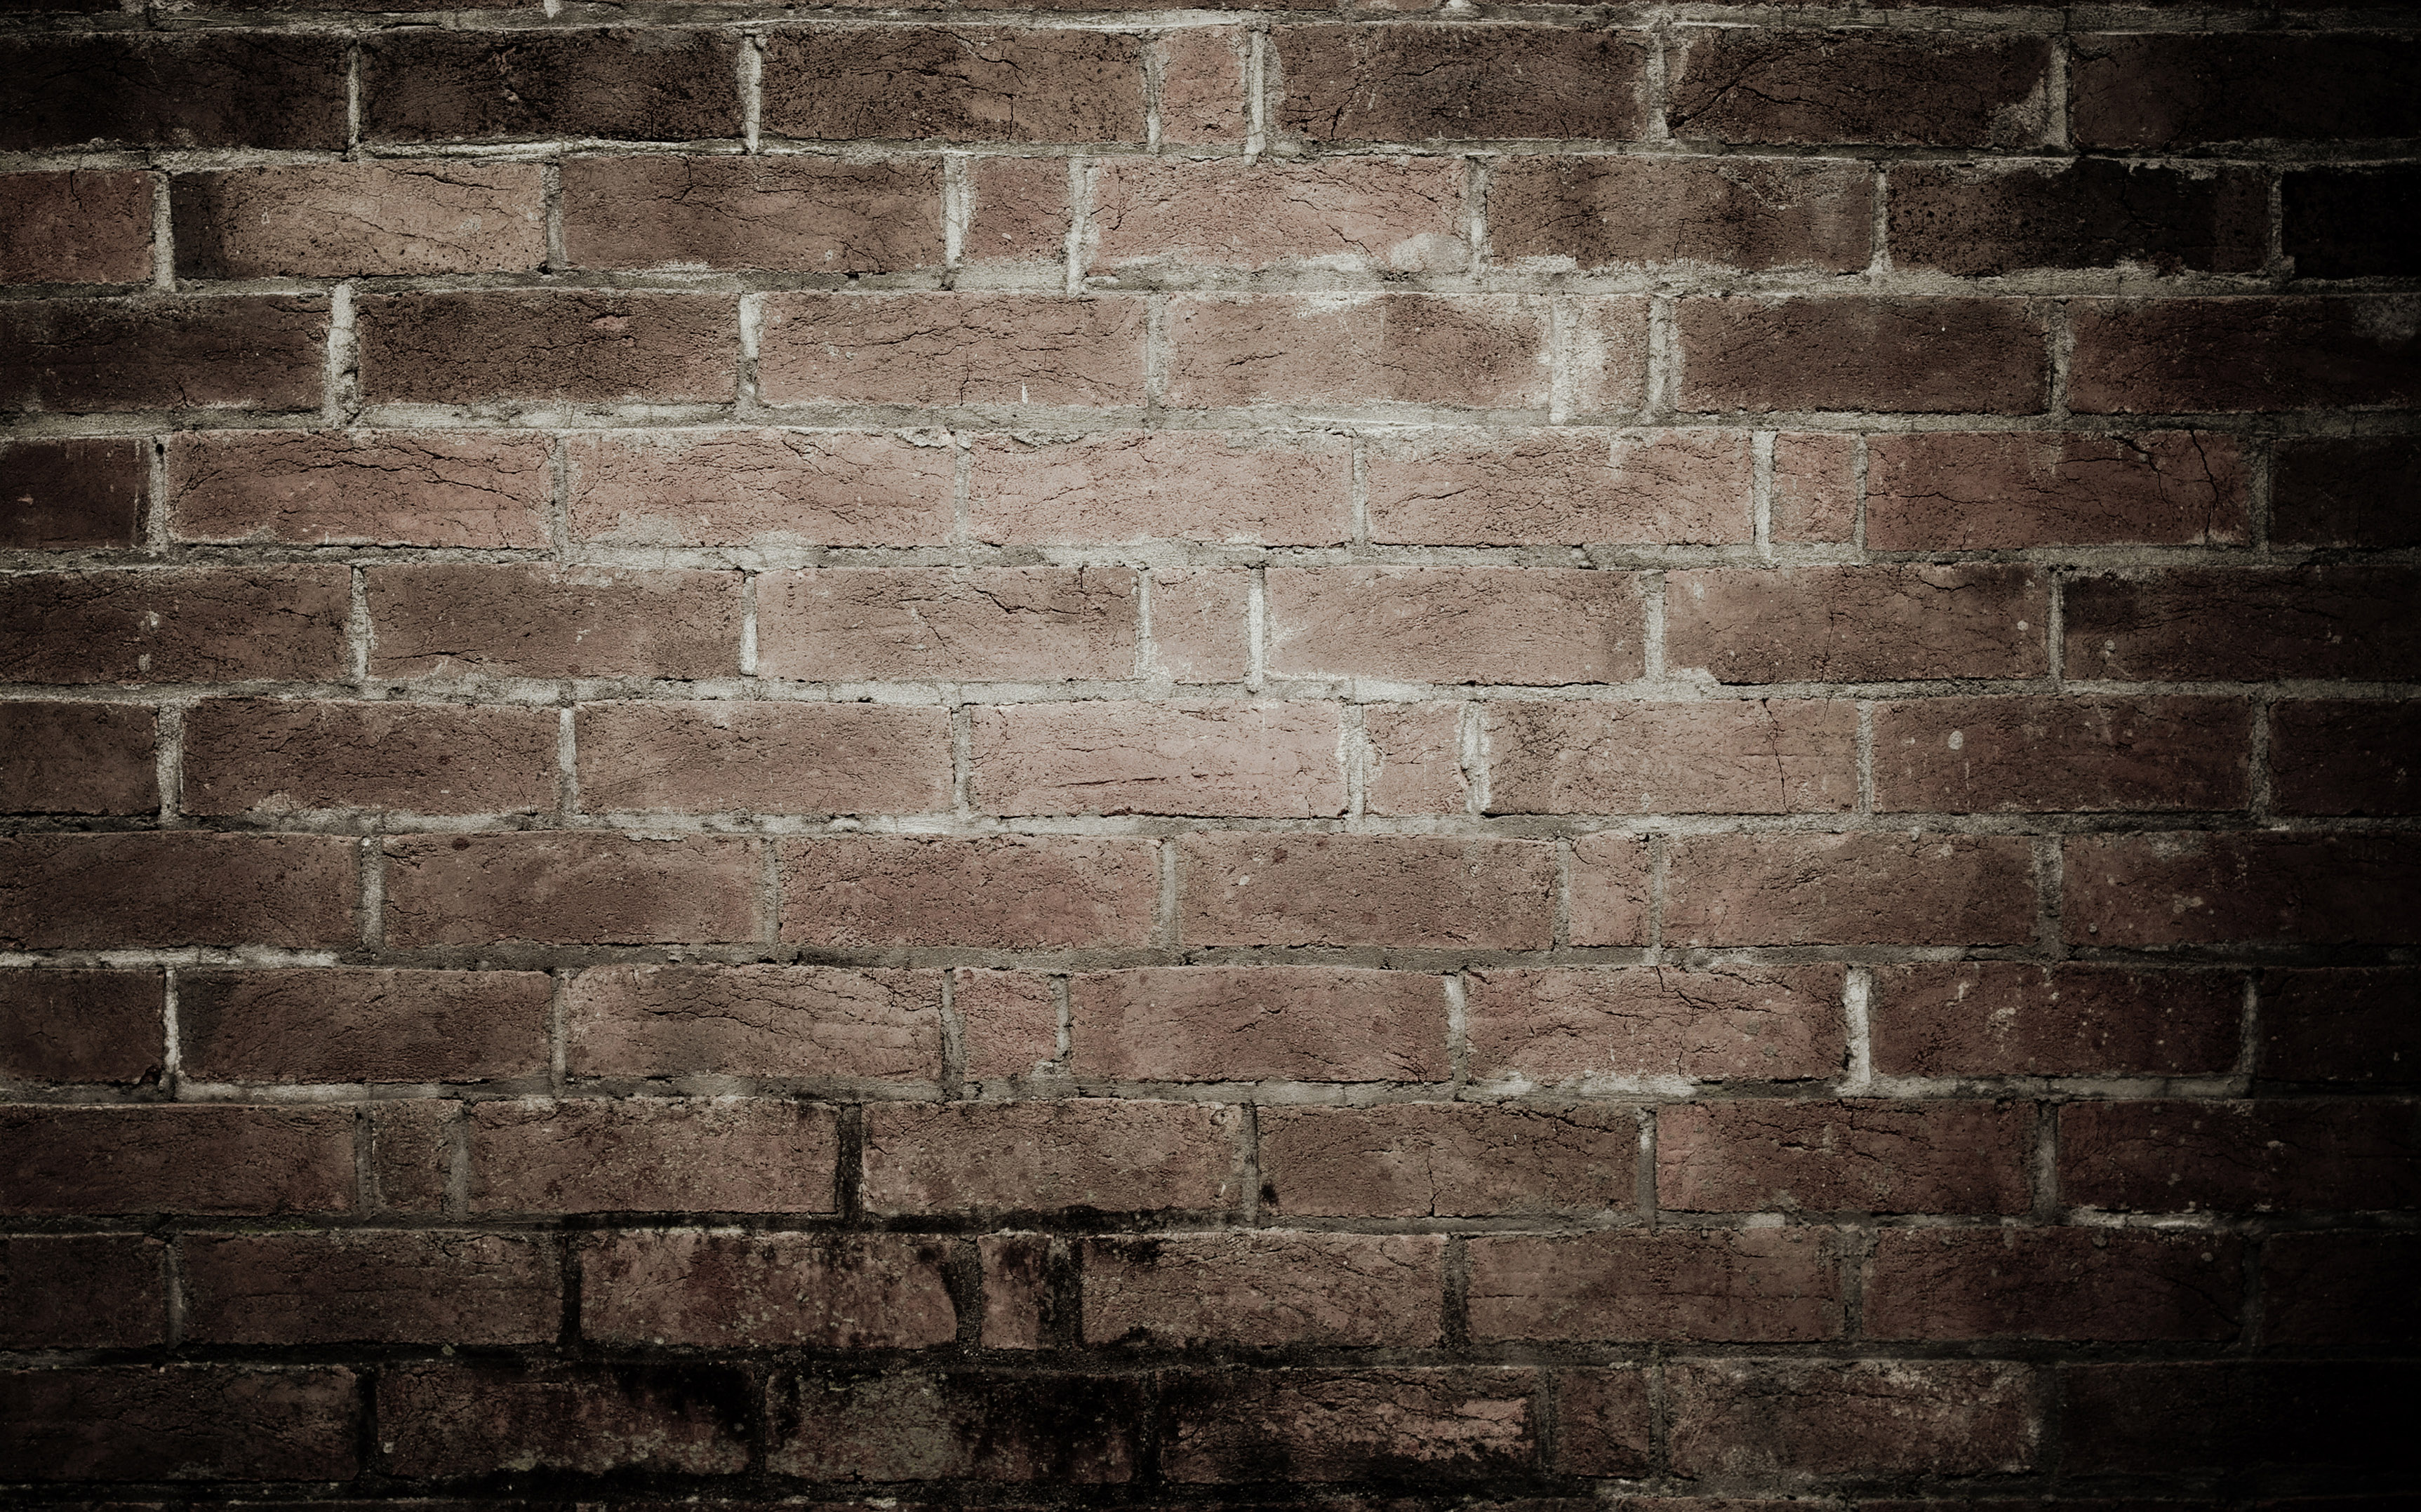 Free Grungy Brick Wall Photo Background Texture | www.myfreetextures